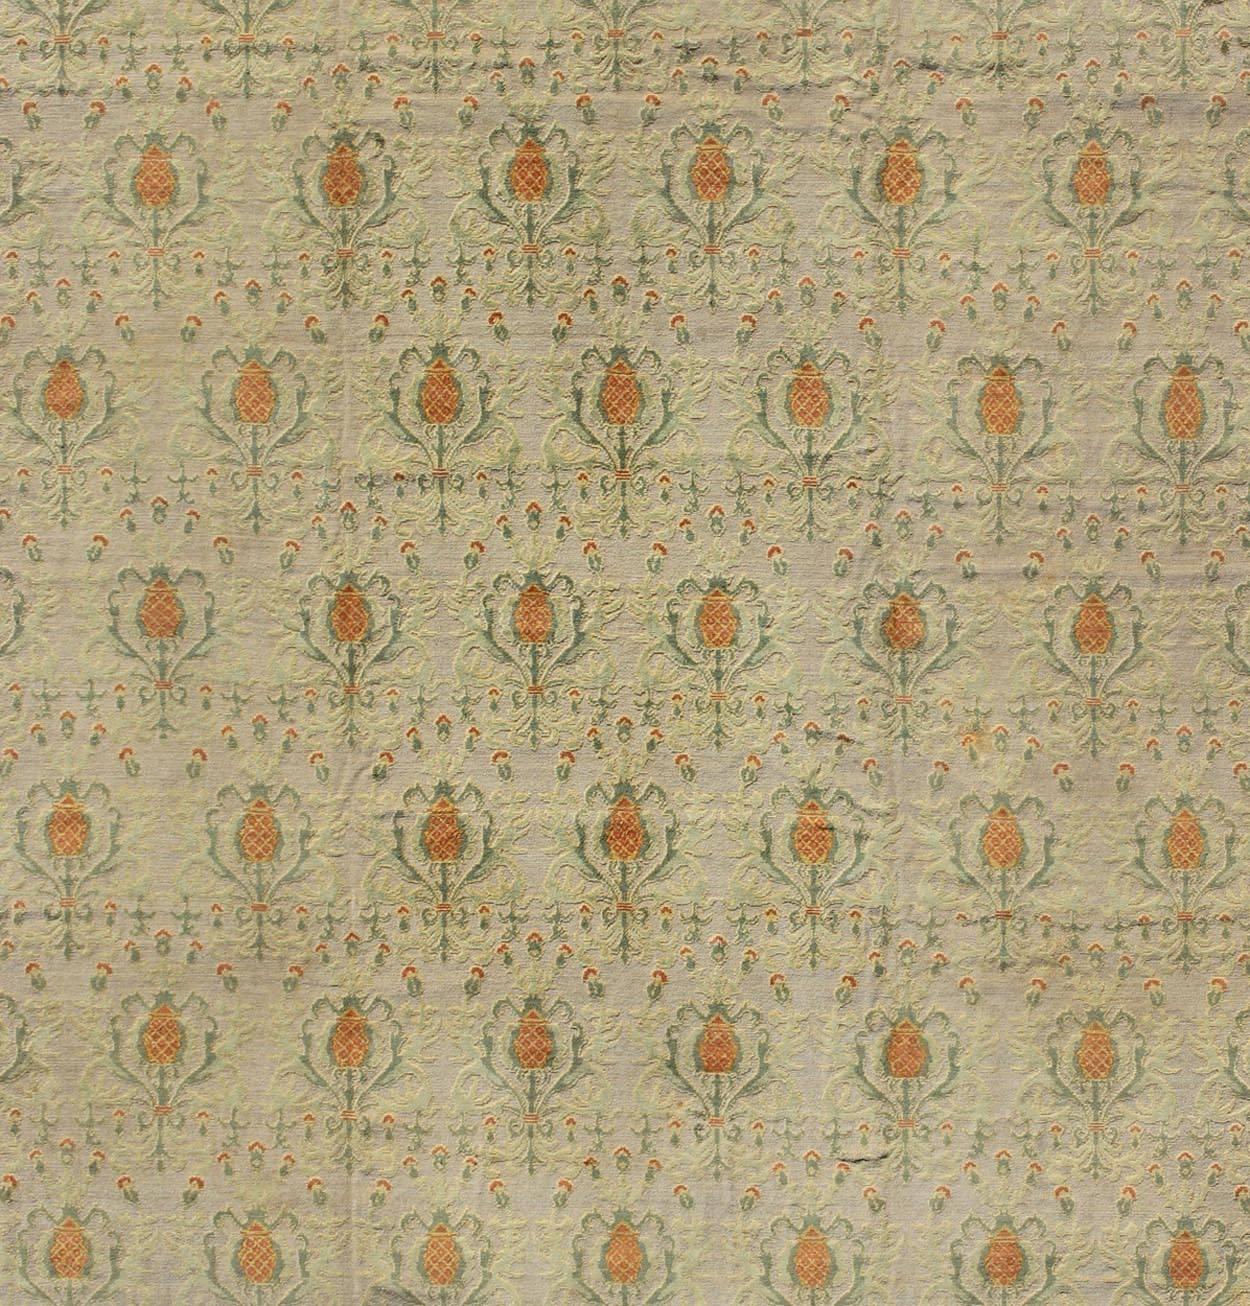 Spanish Colonial Square Sized Antique Spanish Carpet in Green, Orange and Gray/Blue